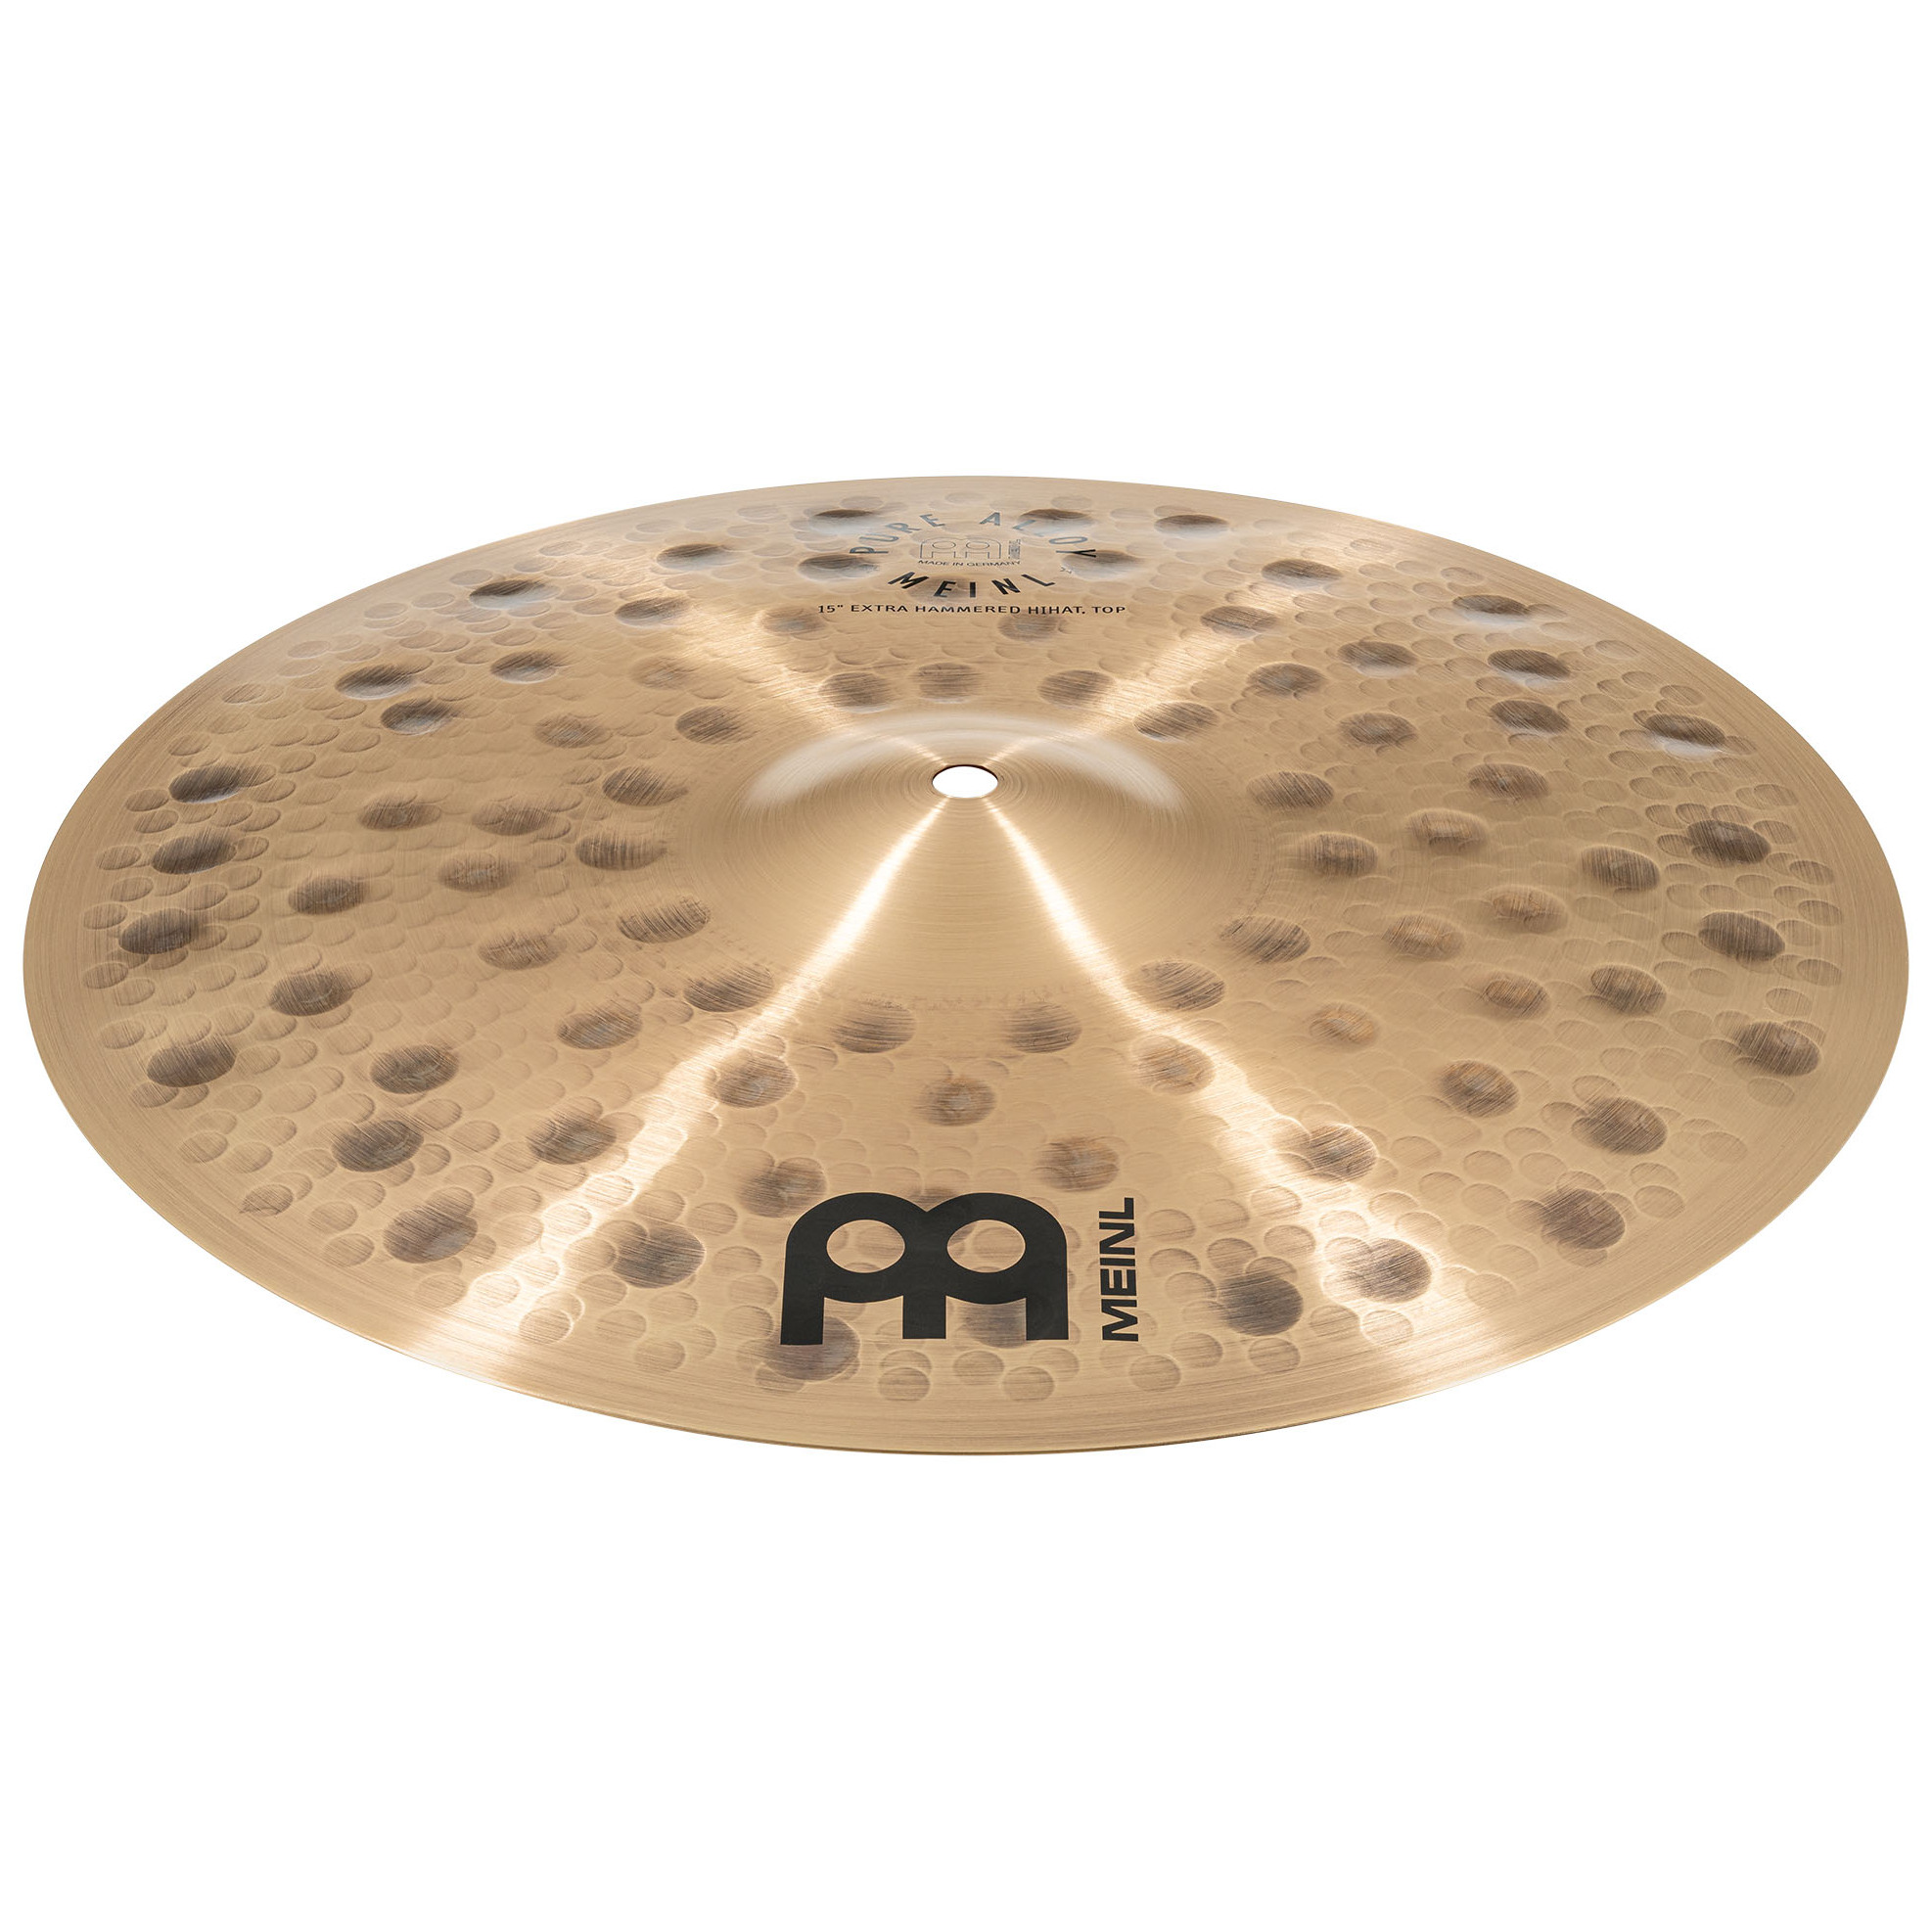 Meinl Cymbals PA15EHH - 15" Pure Alloy Extra Hammered Hihat 4